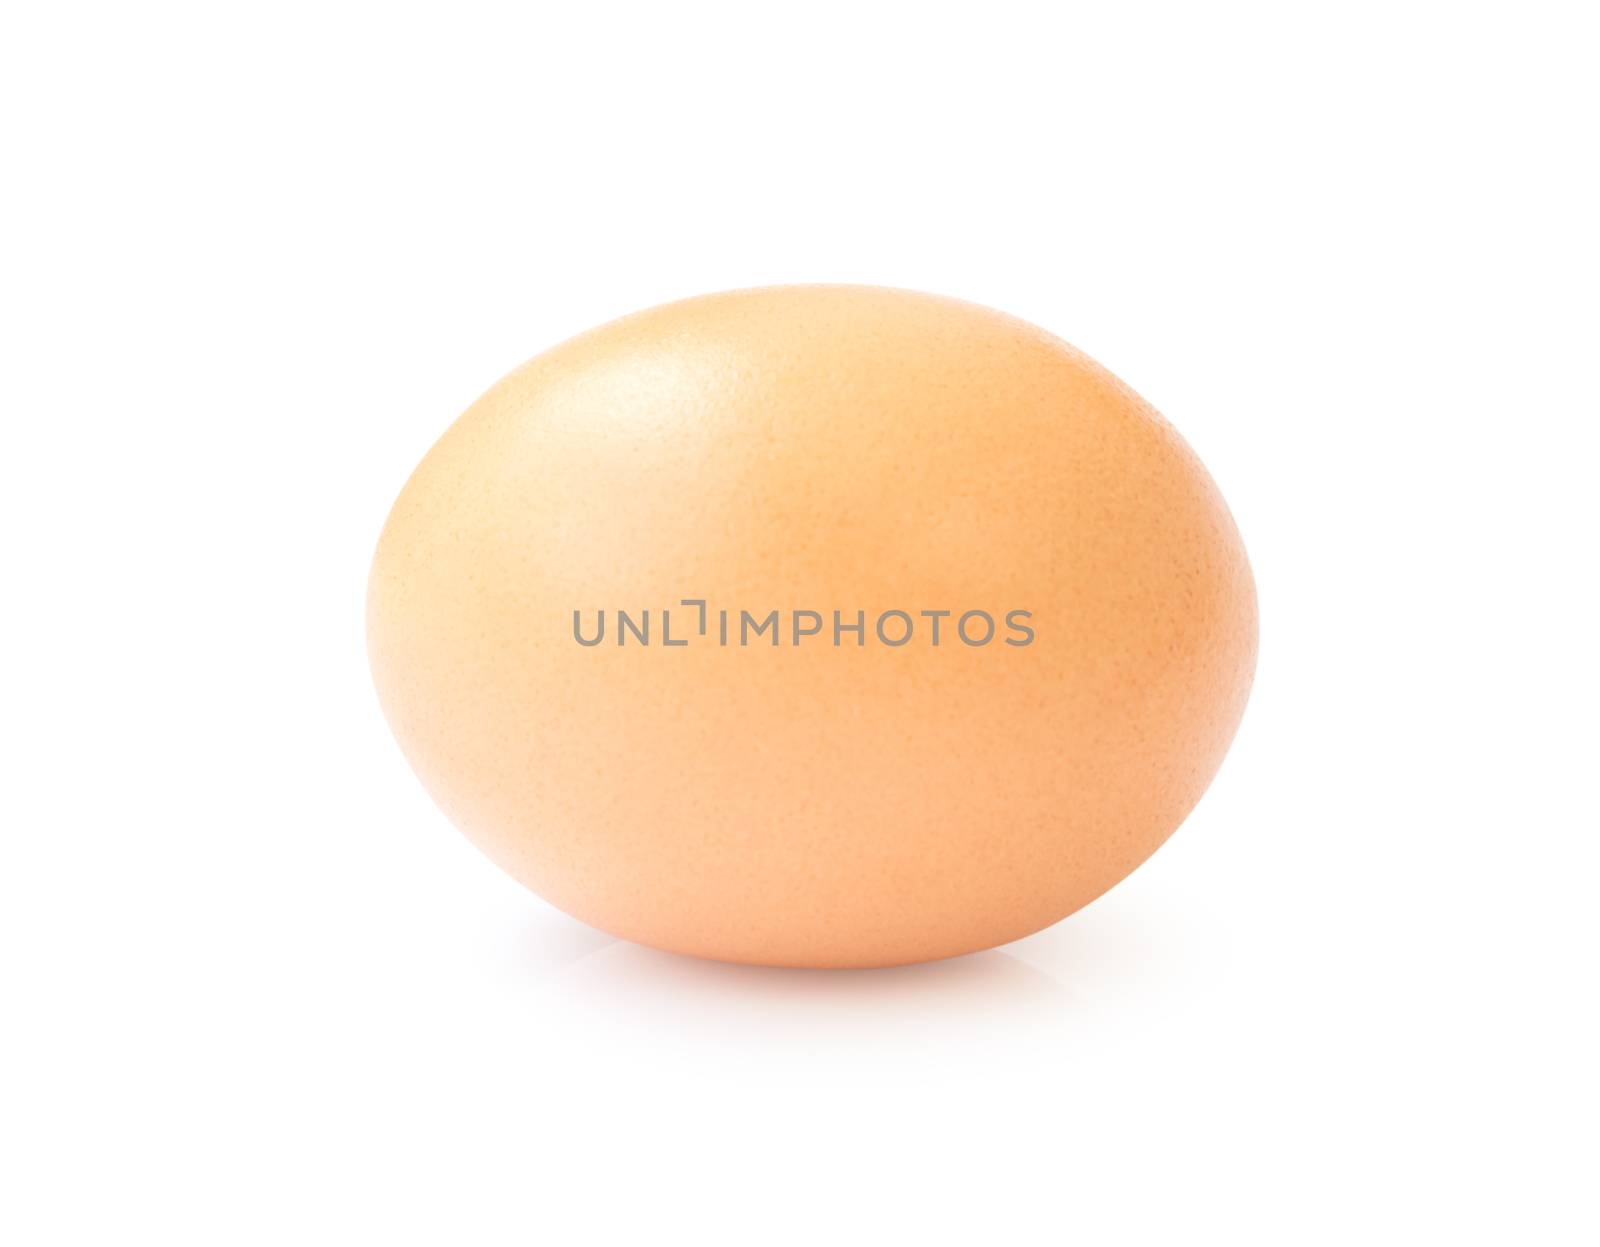 Raw chicken egg on white background with clipping path by pt.pongsak@gmail.com